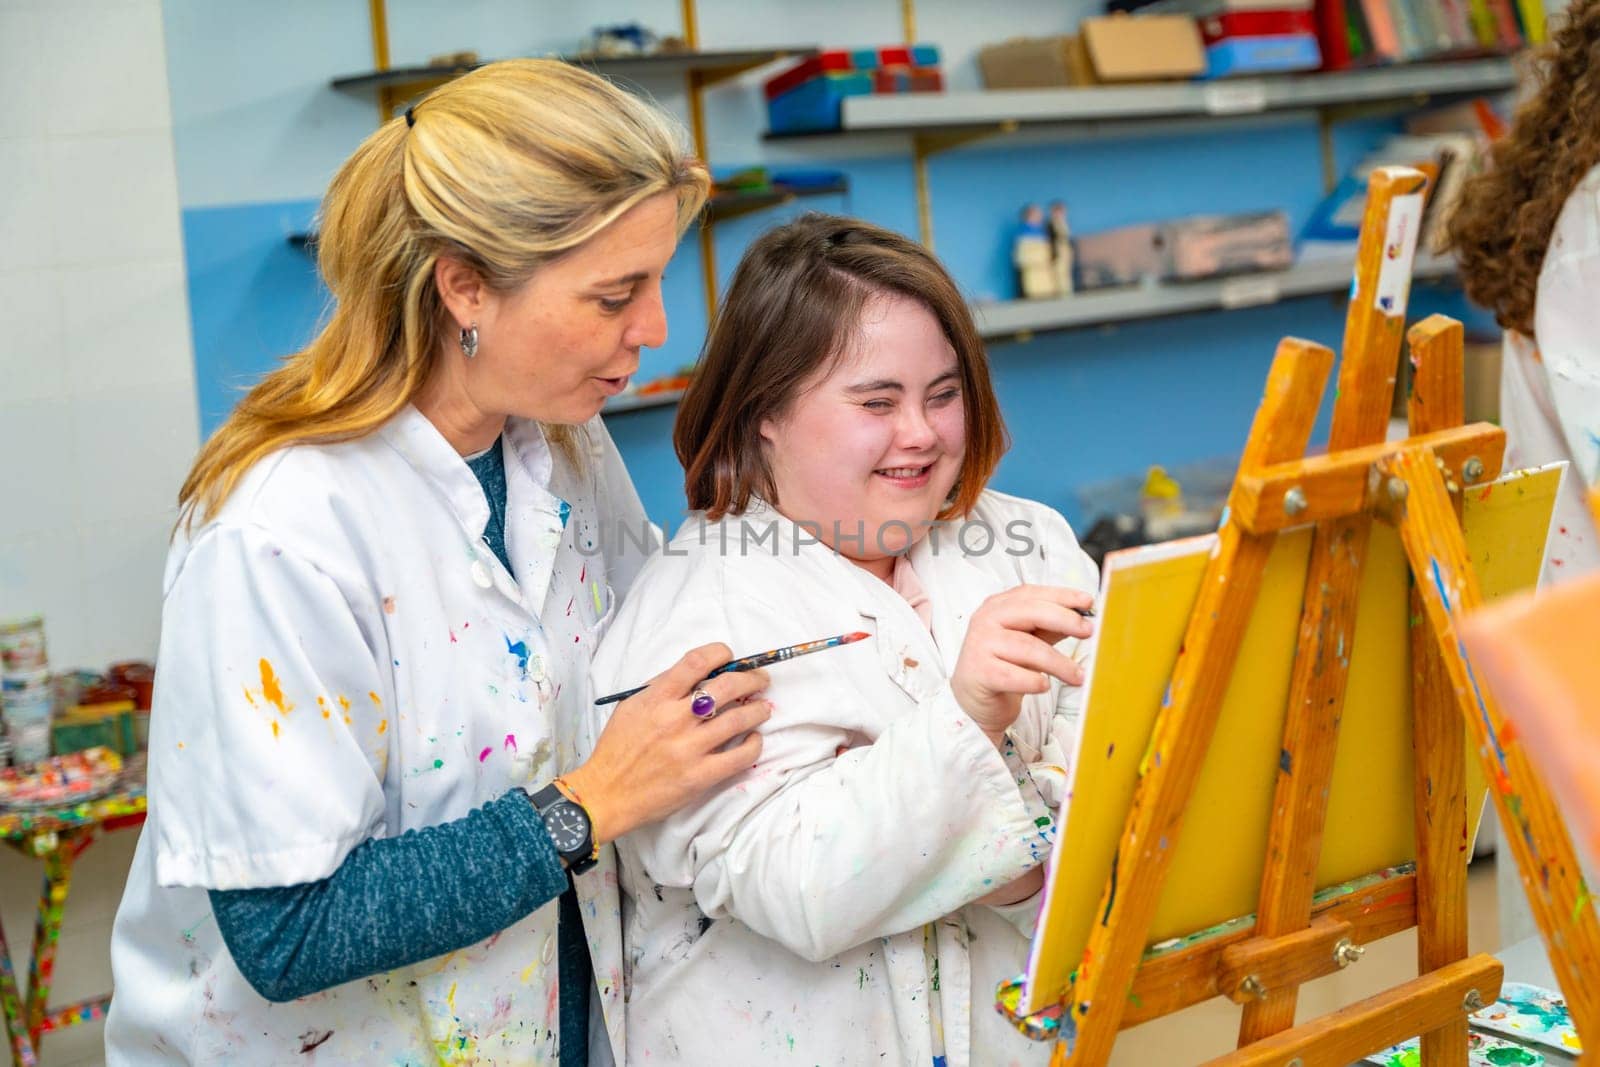 Teacher helping a woman with down syndrome during painting class by Huizi